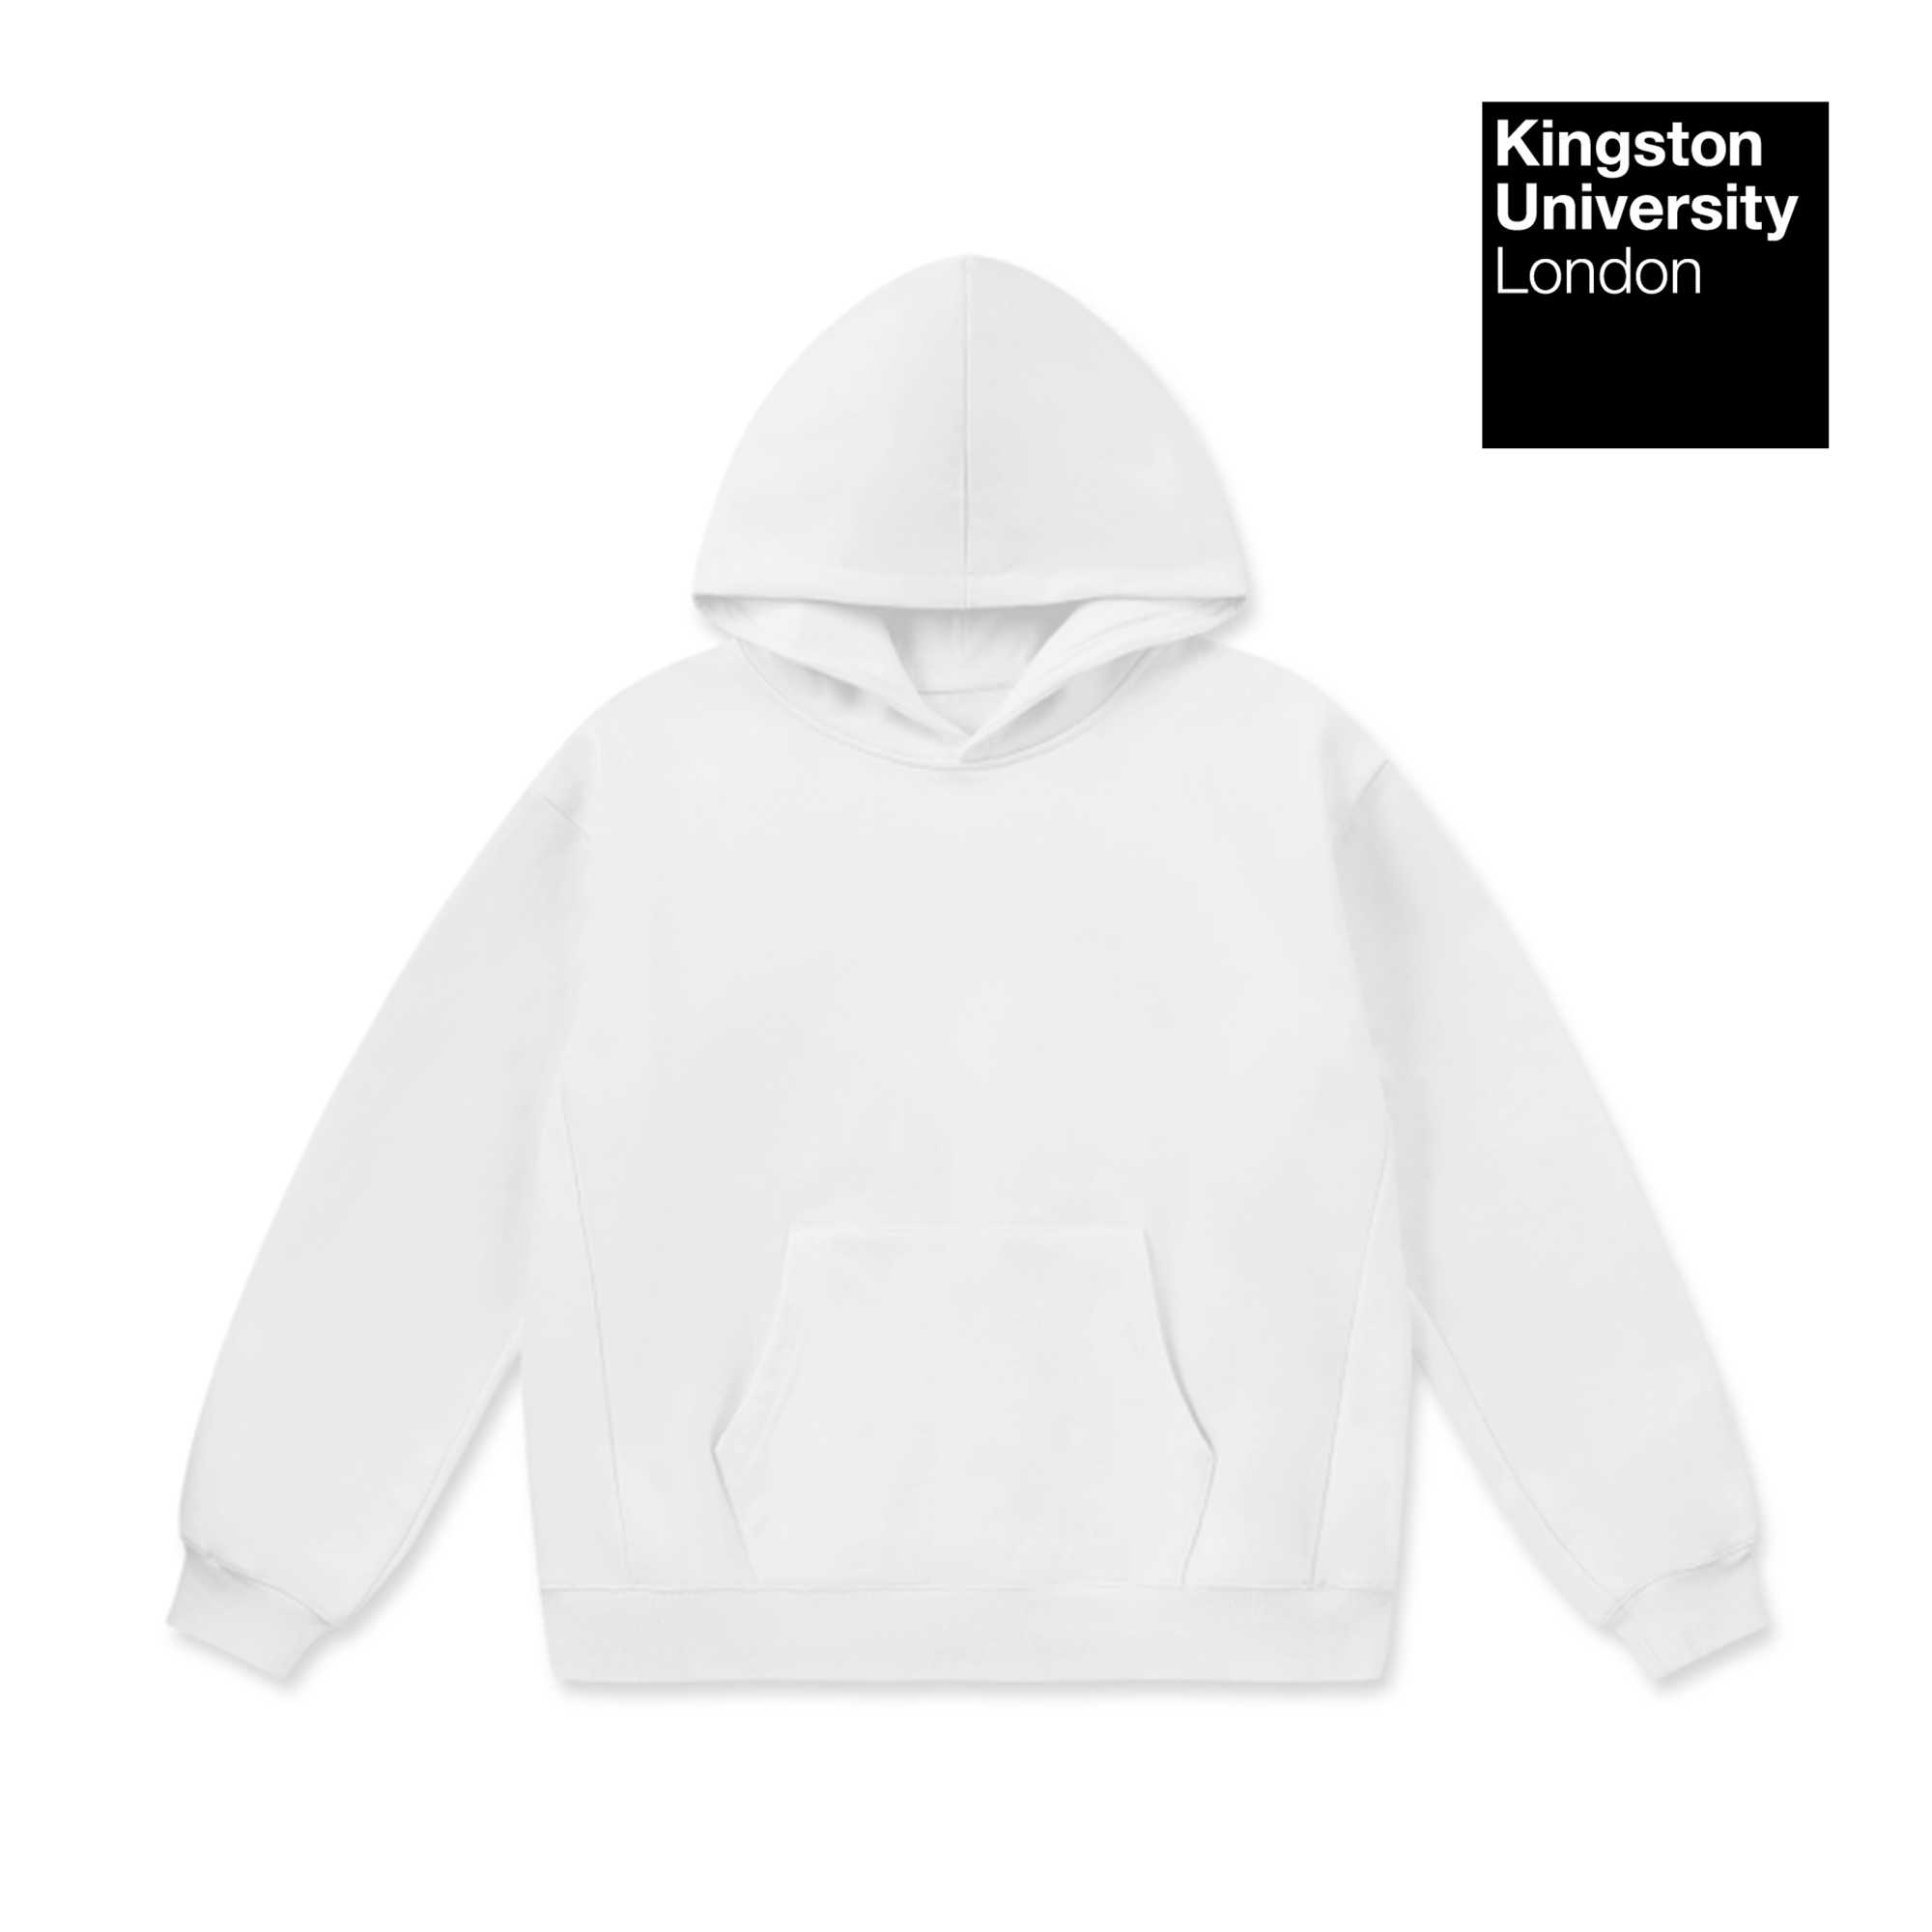 LCC Super Weighted Hoodie - Kingston University London (Classic)